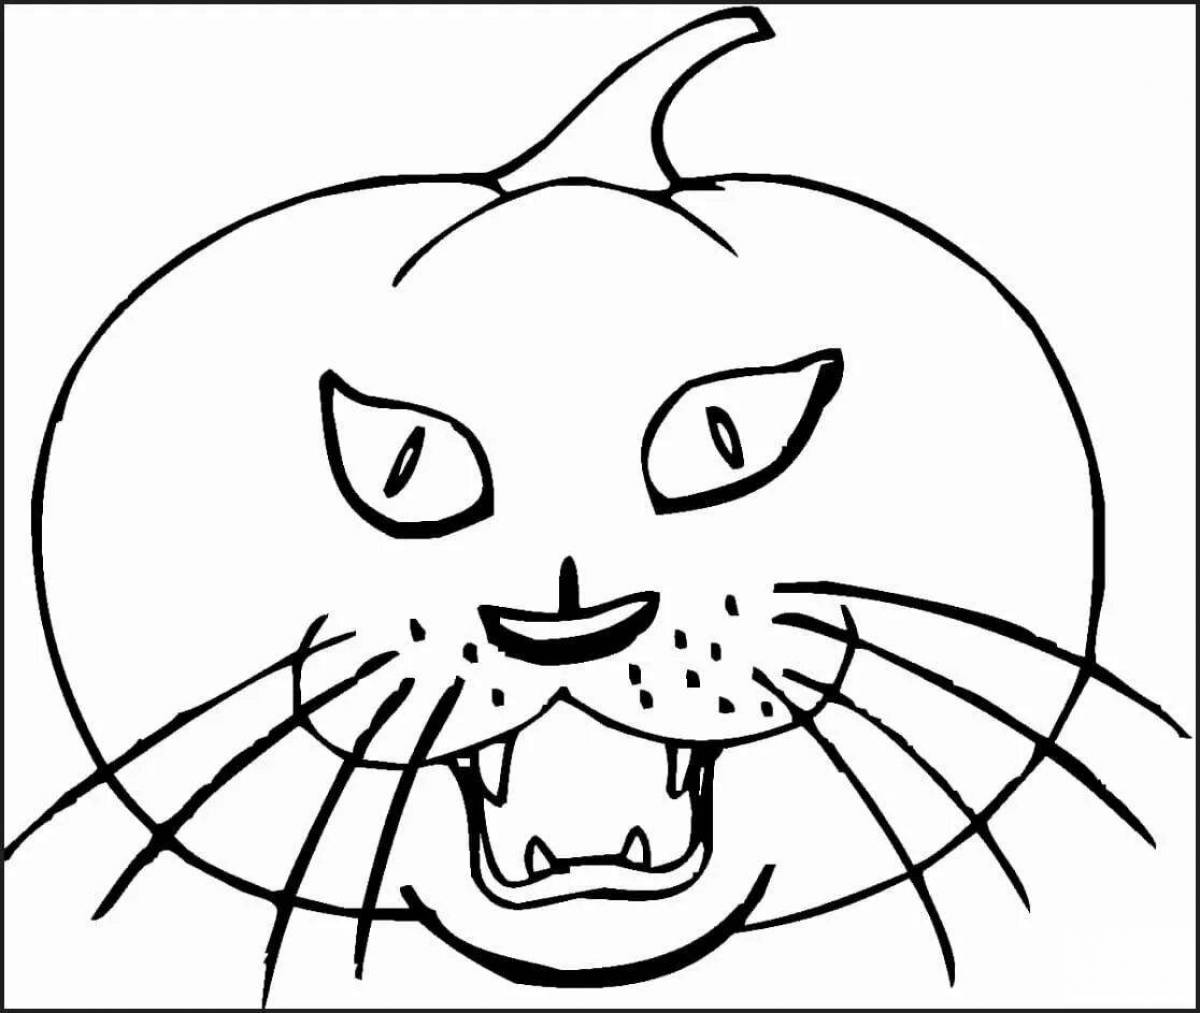 Coloring page disgusting abyssinian cat